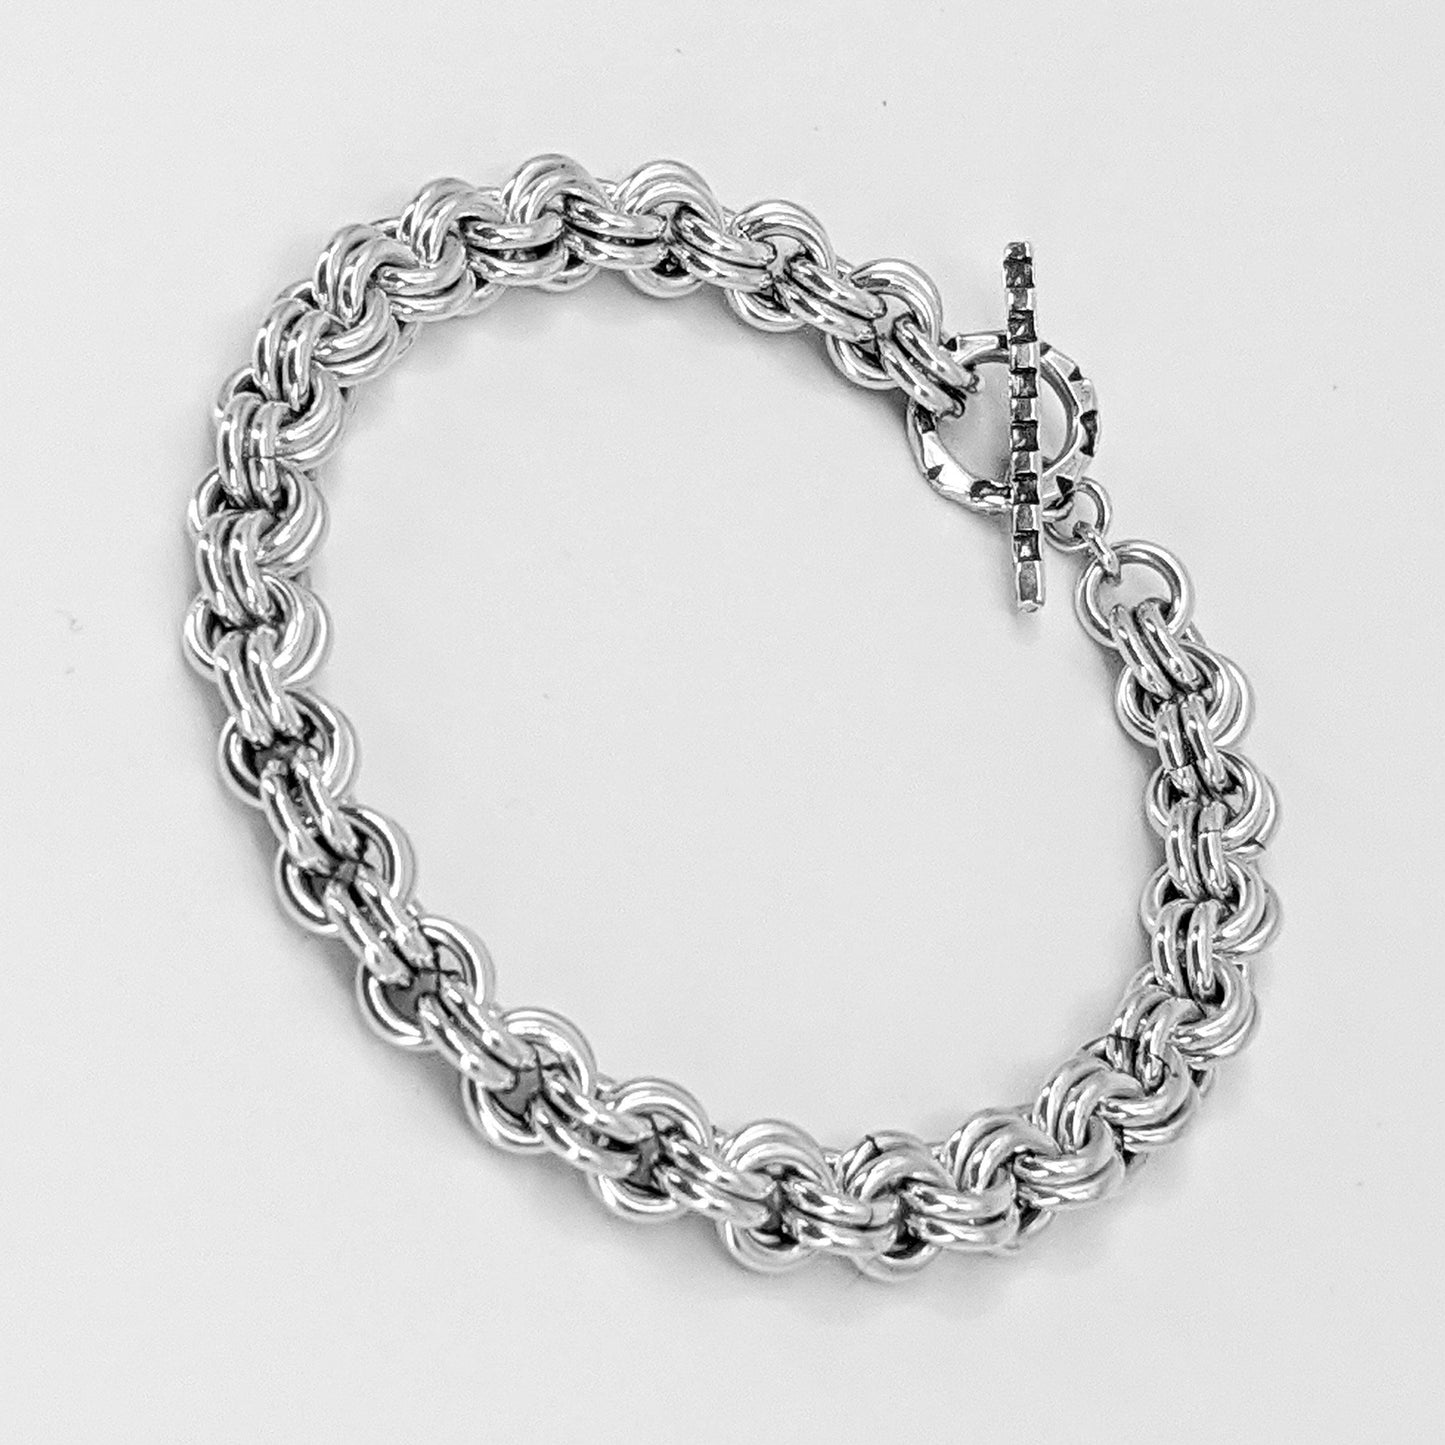 Large Ring (10mm) Chainmail Bracelet W/Crystals Kit Silver ((plated Copper) / Clear